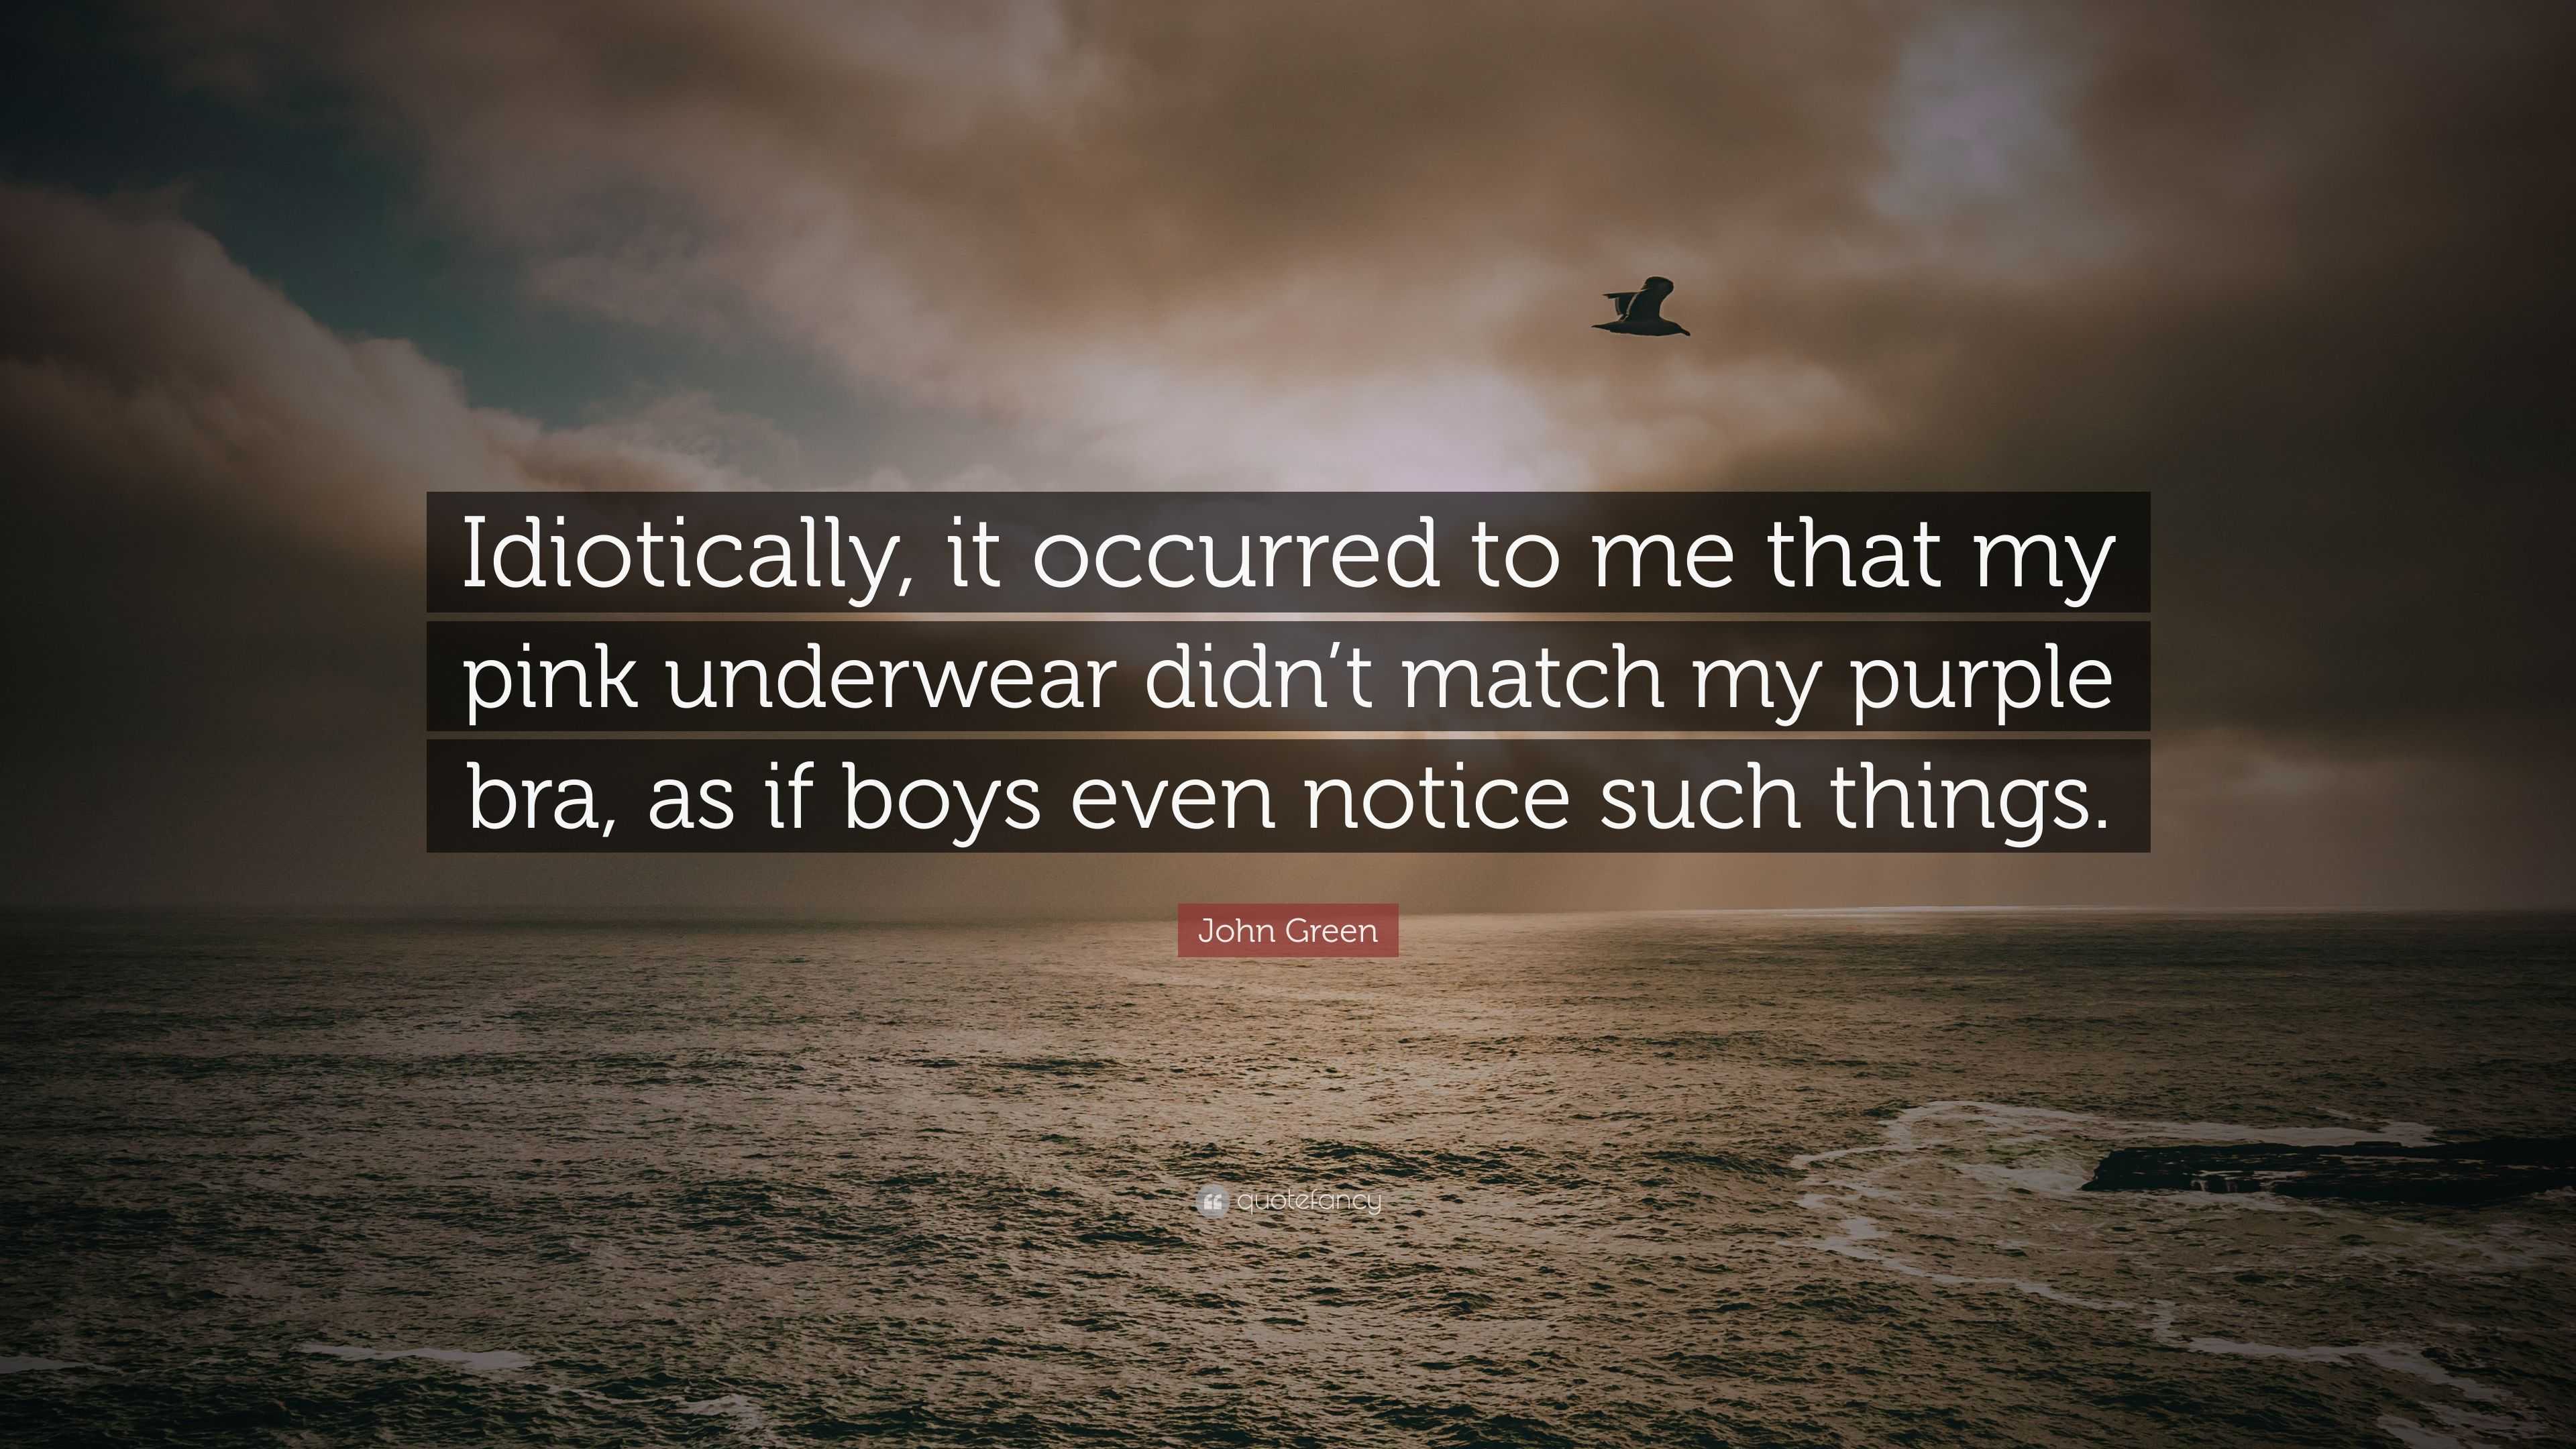 John Green Quote: “Idiotically, it occurred to me that my pink underwear  didn't match my